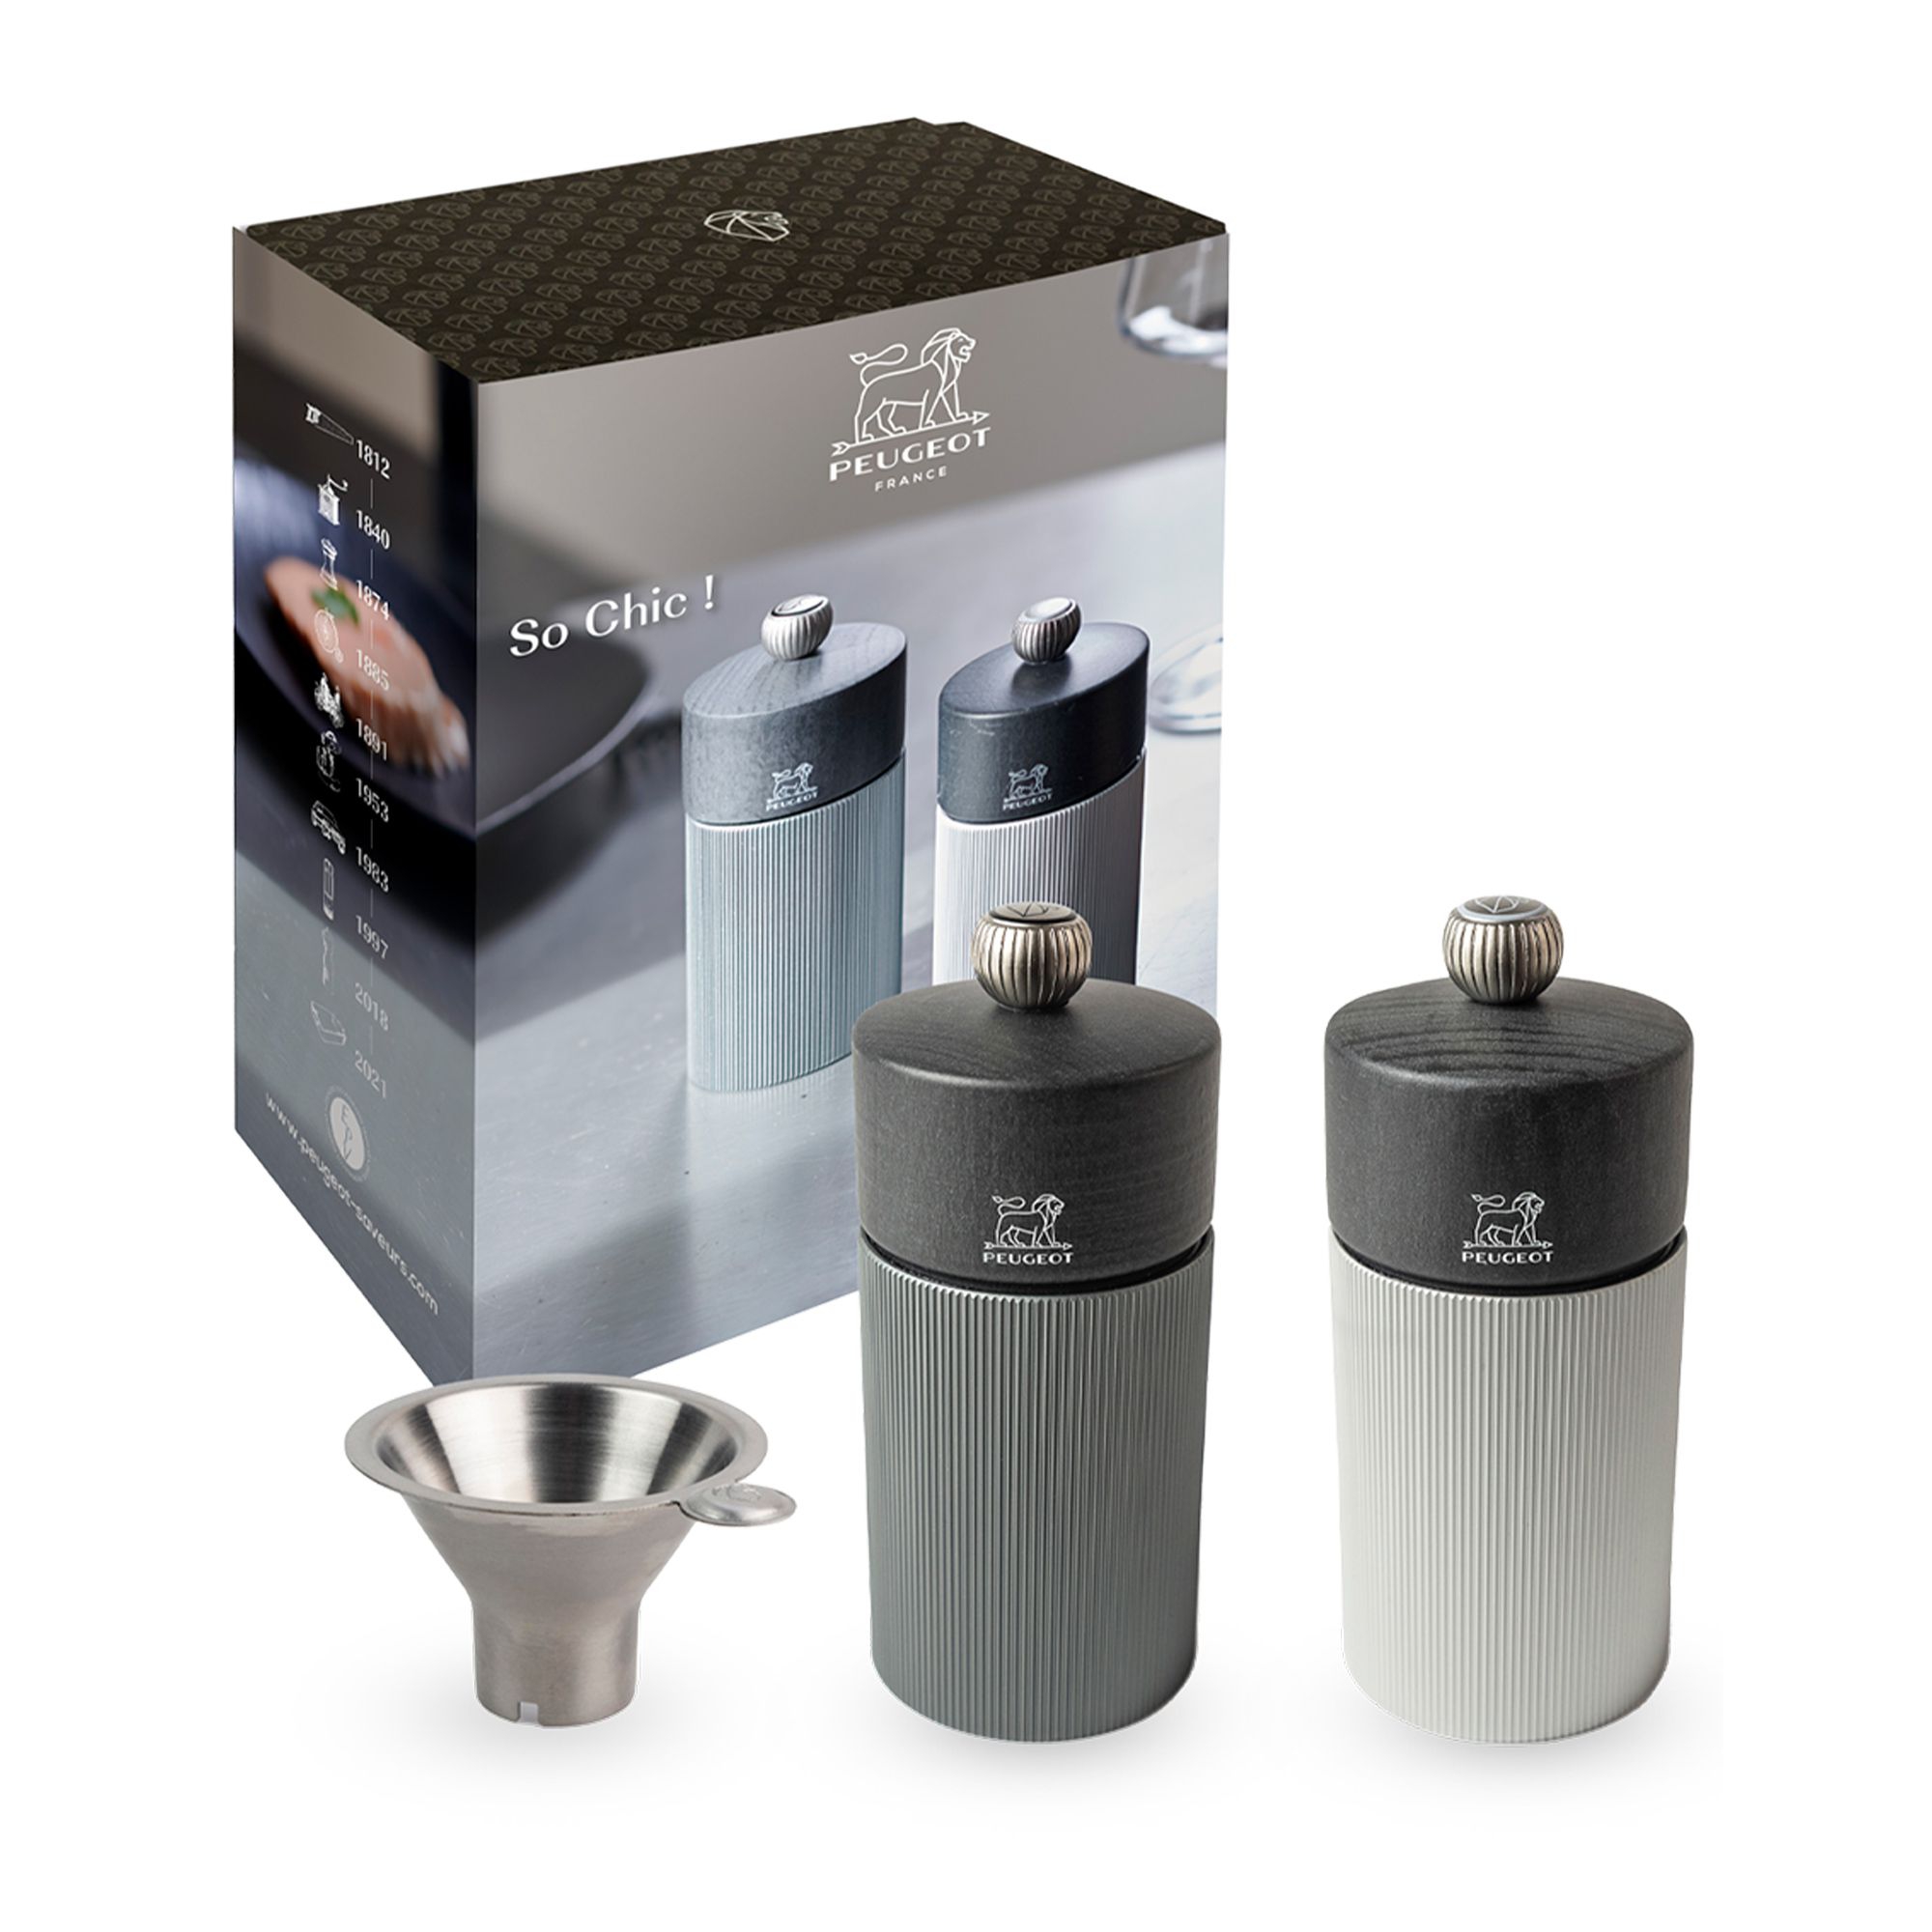 PSP Peugeot - Pepper and salt mill duo